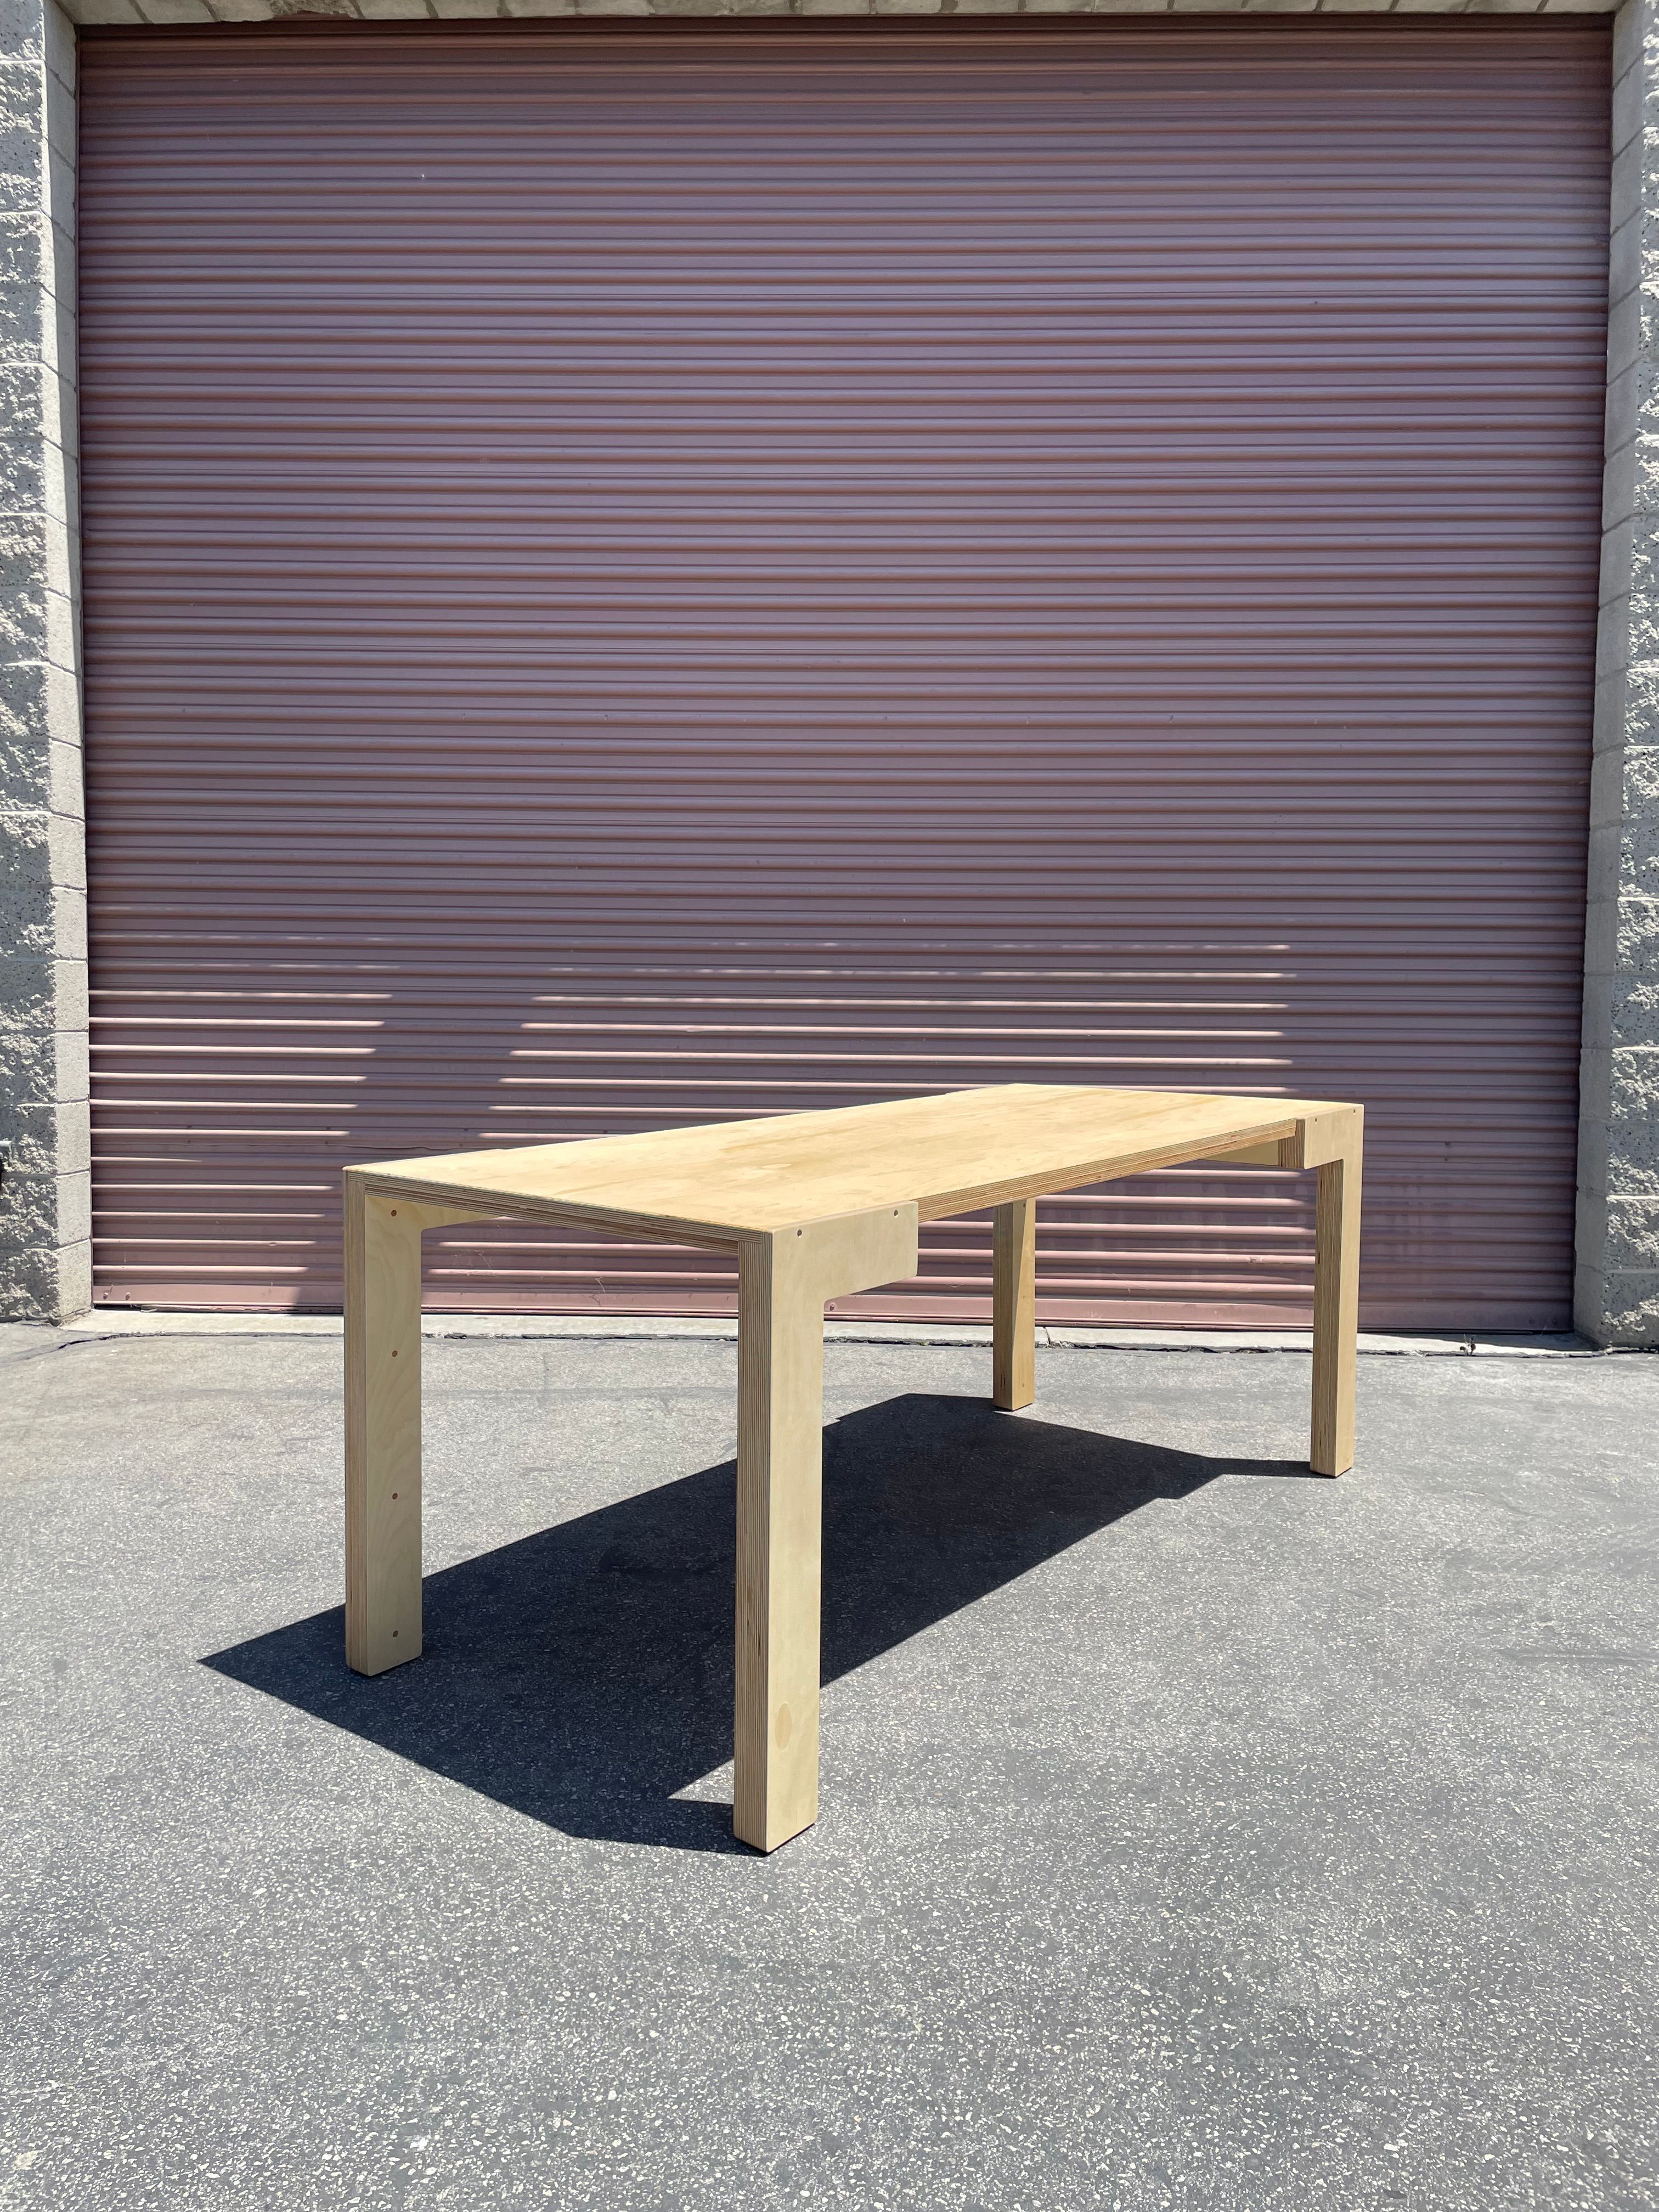  Frame Table - Gallery Yamahon  product image 5